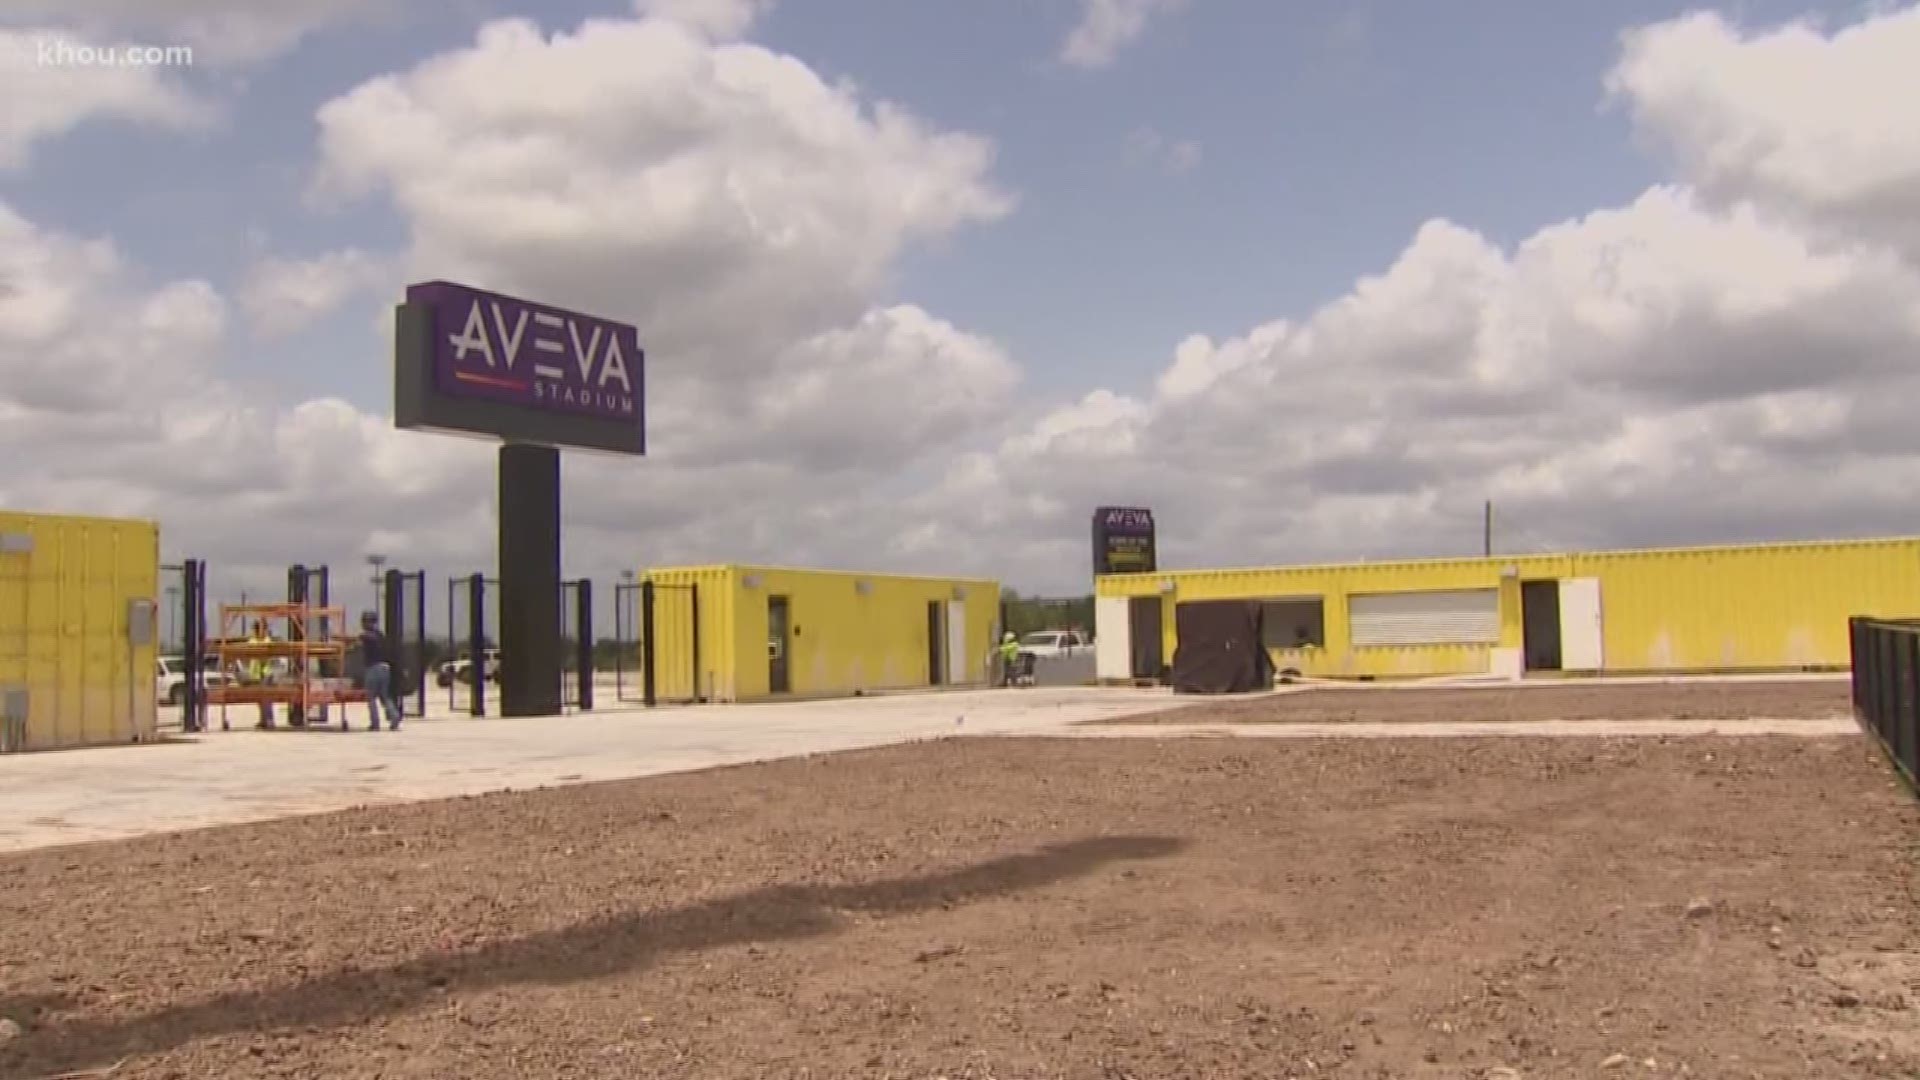 The new Aveva Stadium for rugby is unique, and here's why.